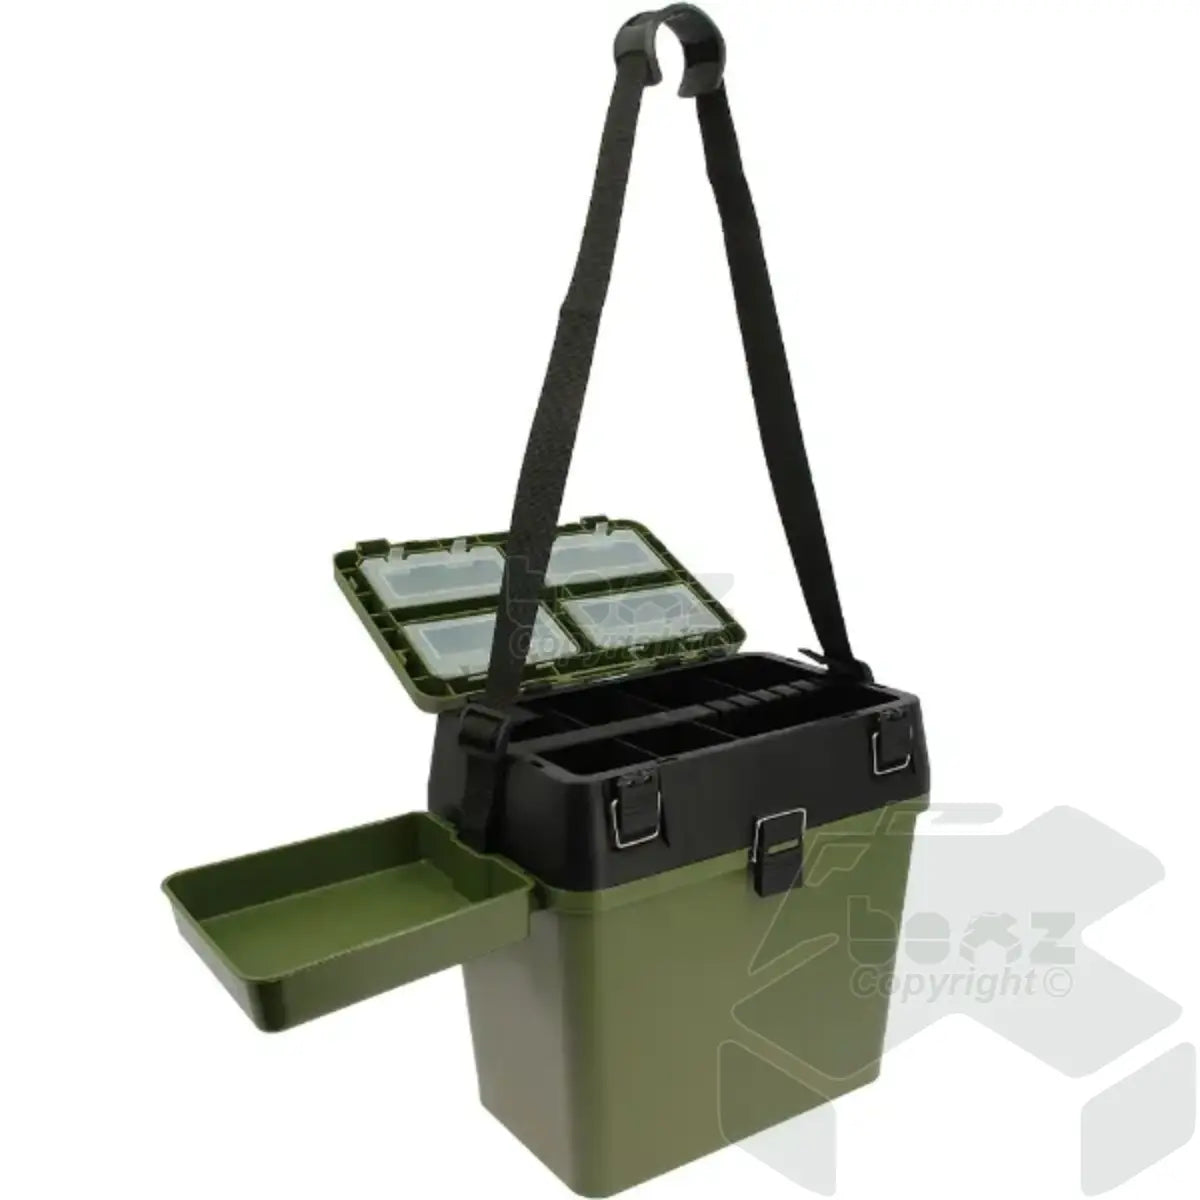 NGT Session Seat Box - With Side Tray and Shoulder Strap